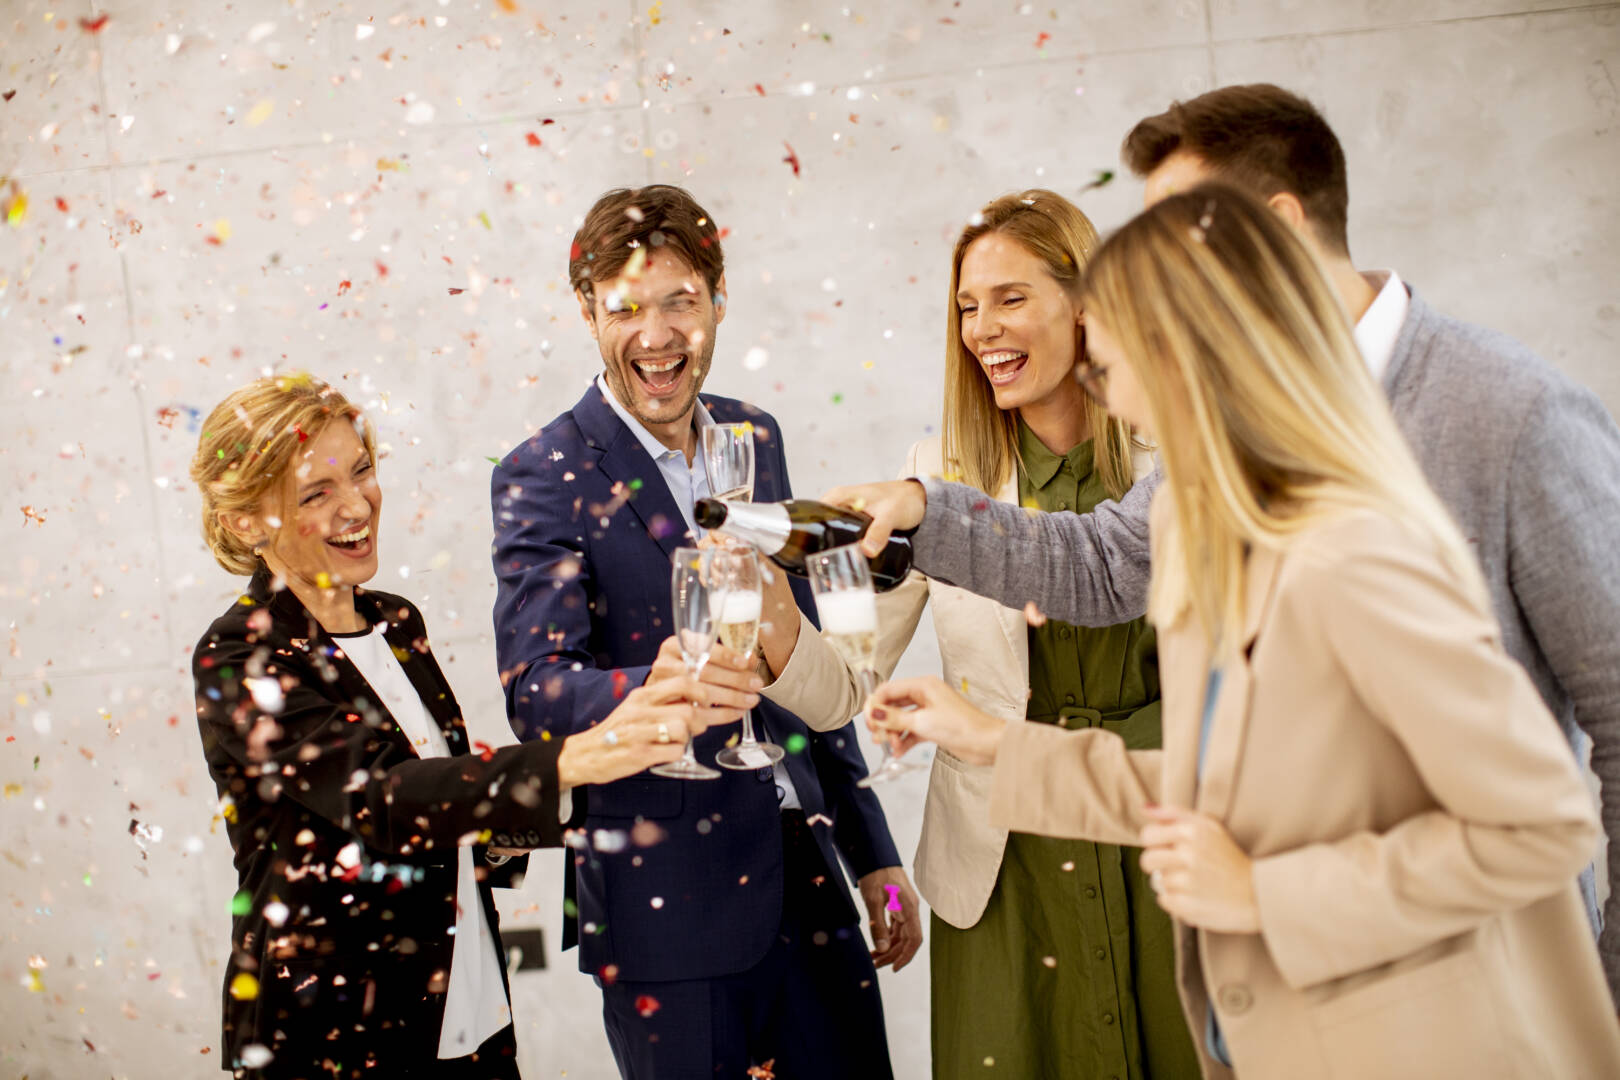 Group of business people celebrating and toasting with confetti